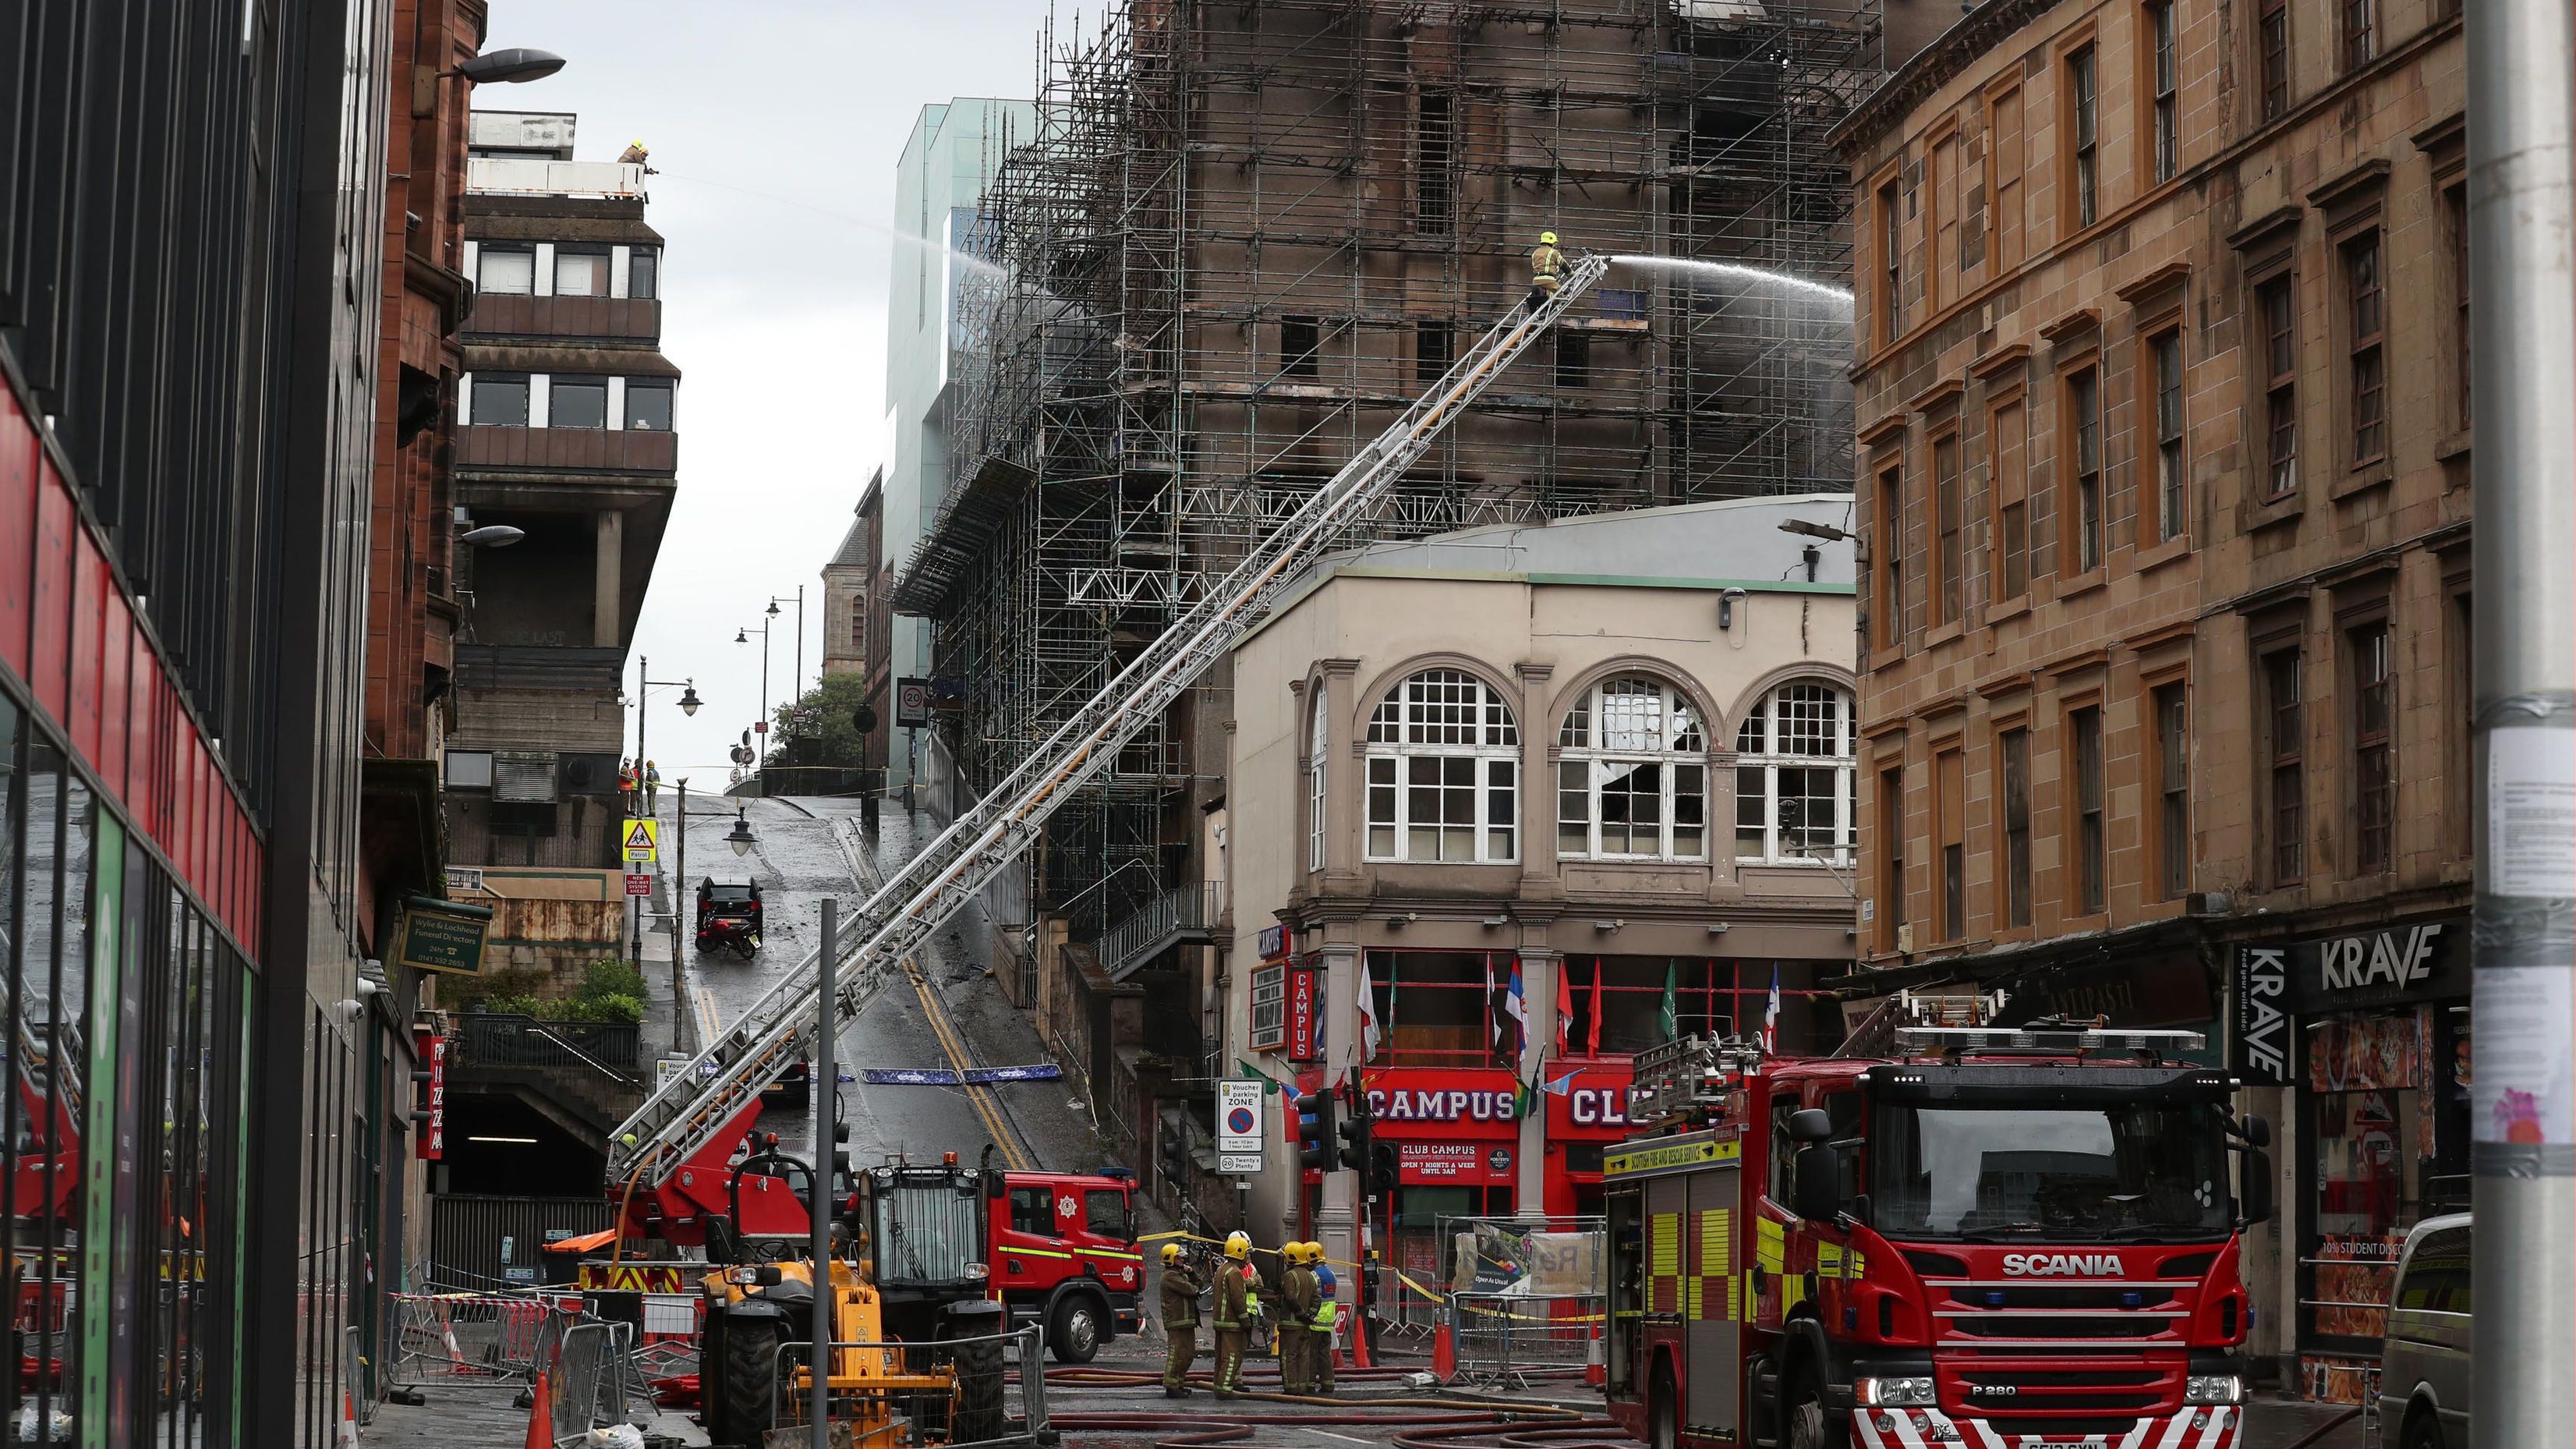 In June 2018 the Mackintosh building was extensively damaged while it was being restored at a cost of £35 million after a fire in 2014